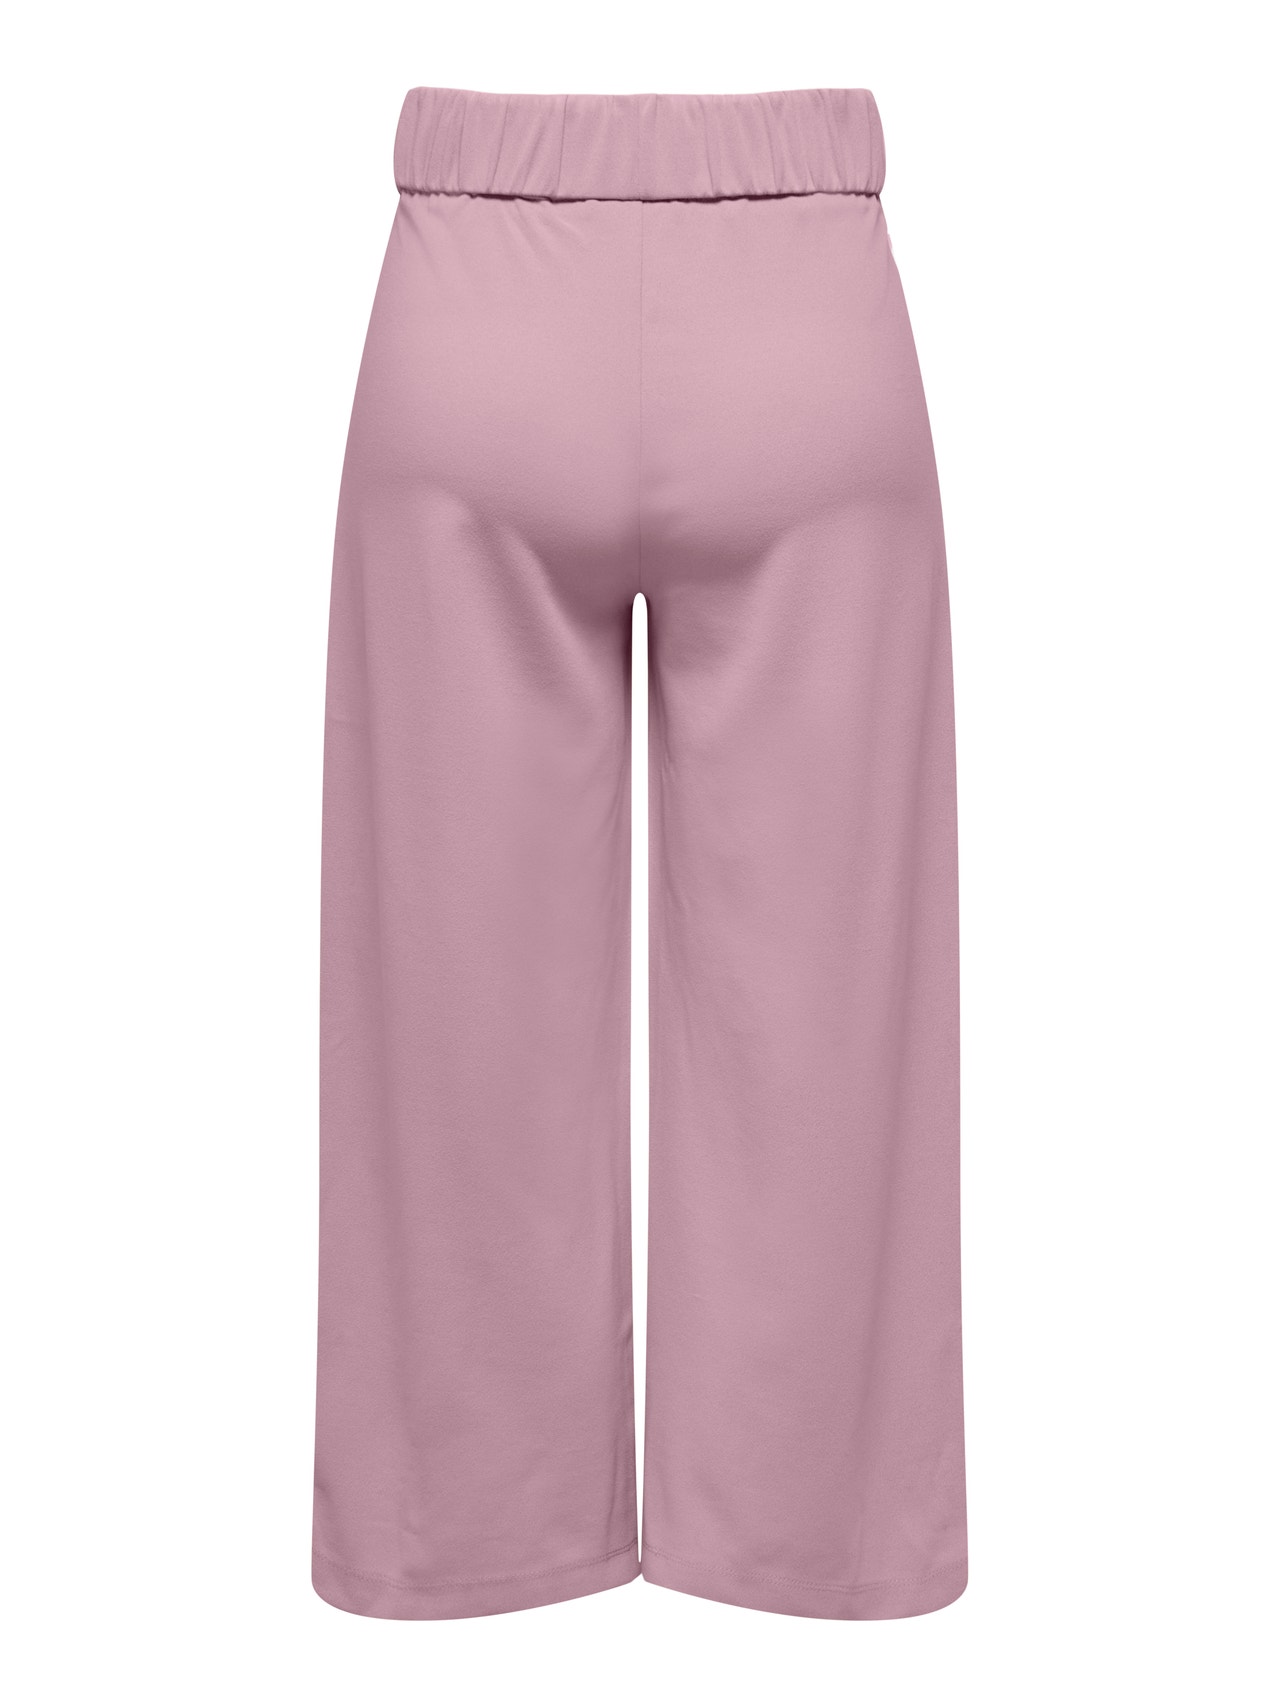 ONLY Wide legs ankle Trousers -Mauve Shadows - 15208417